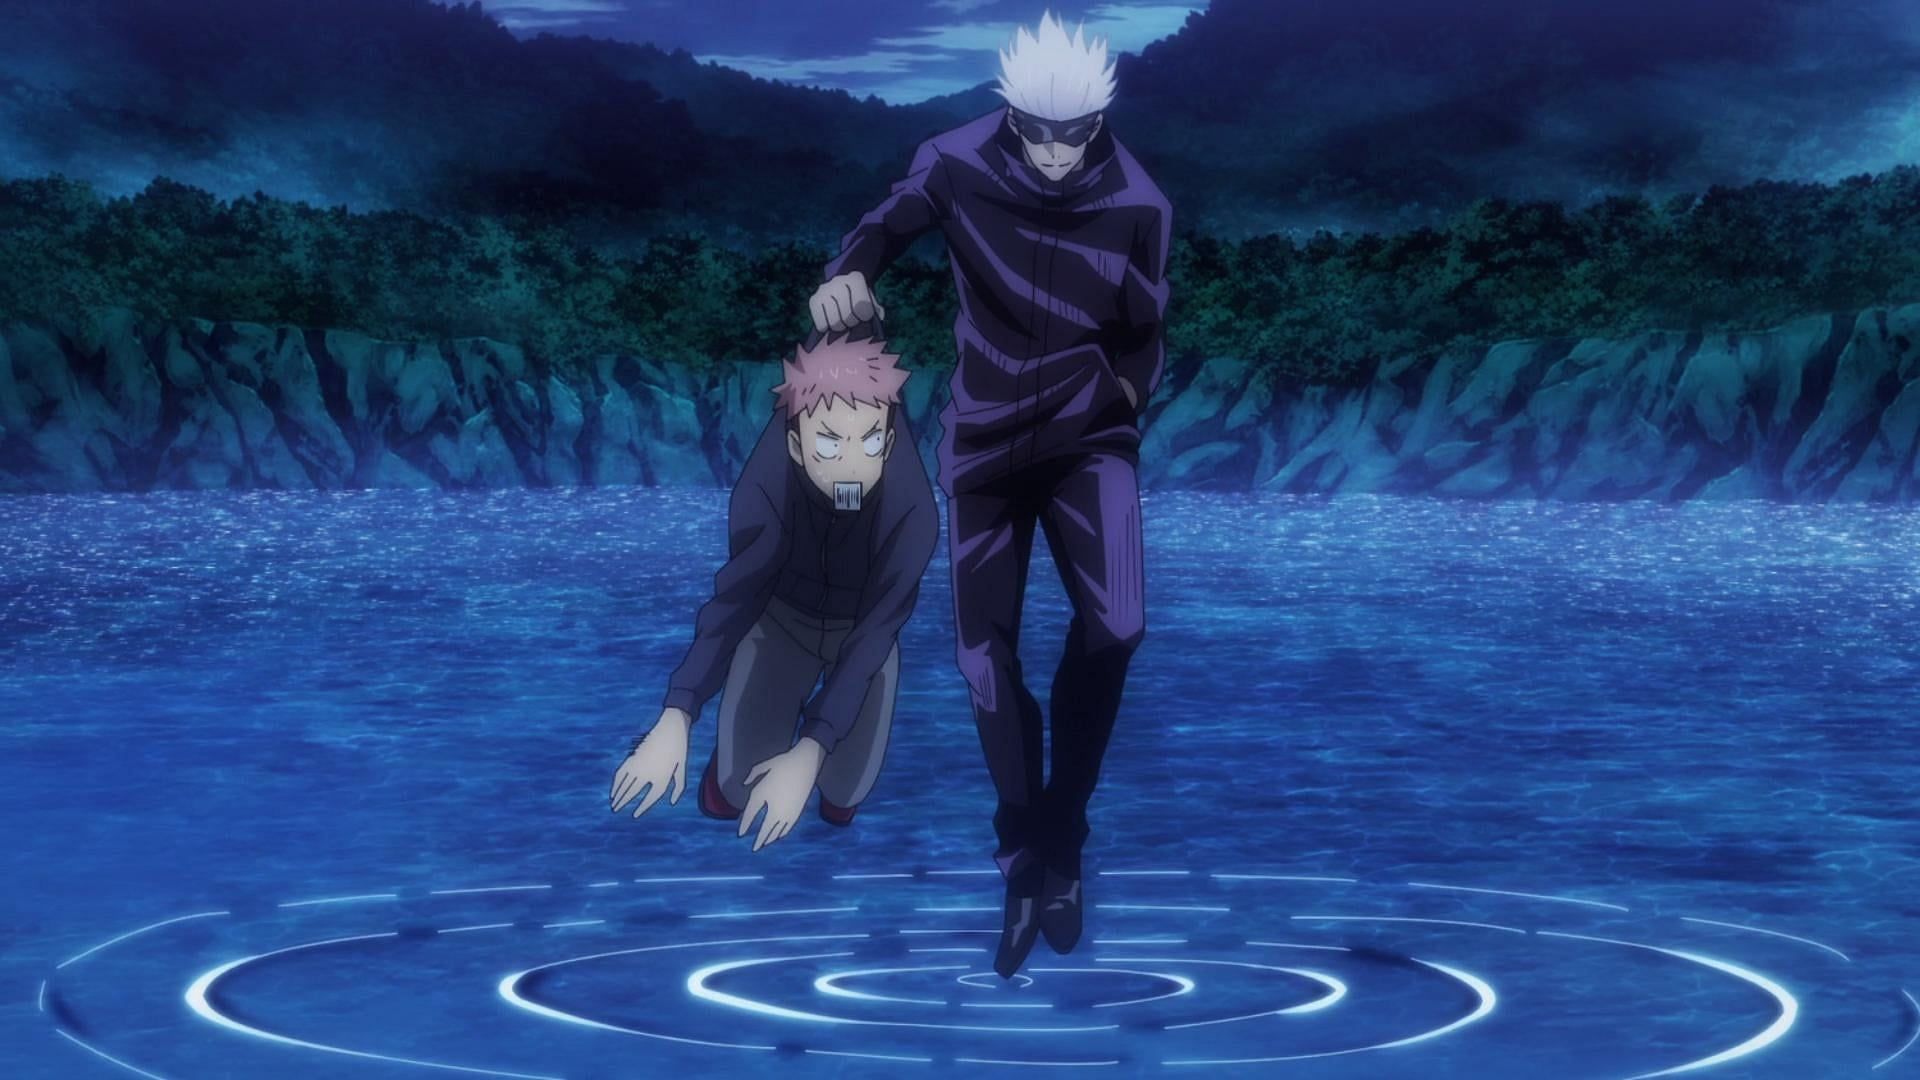 Yuji catches up to Yuta and Gojo with his new power in Jujutsu Kaisen chapter 248 (Image via MAPPA Studios)